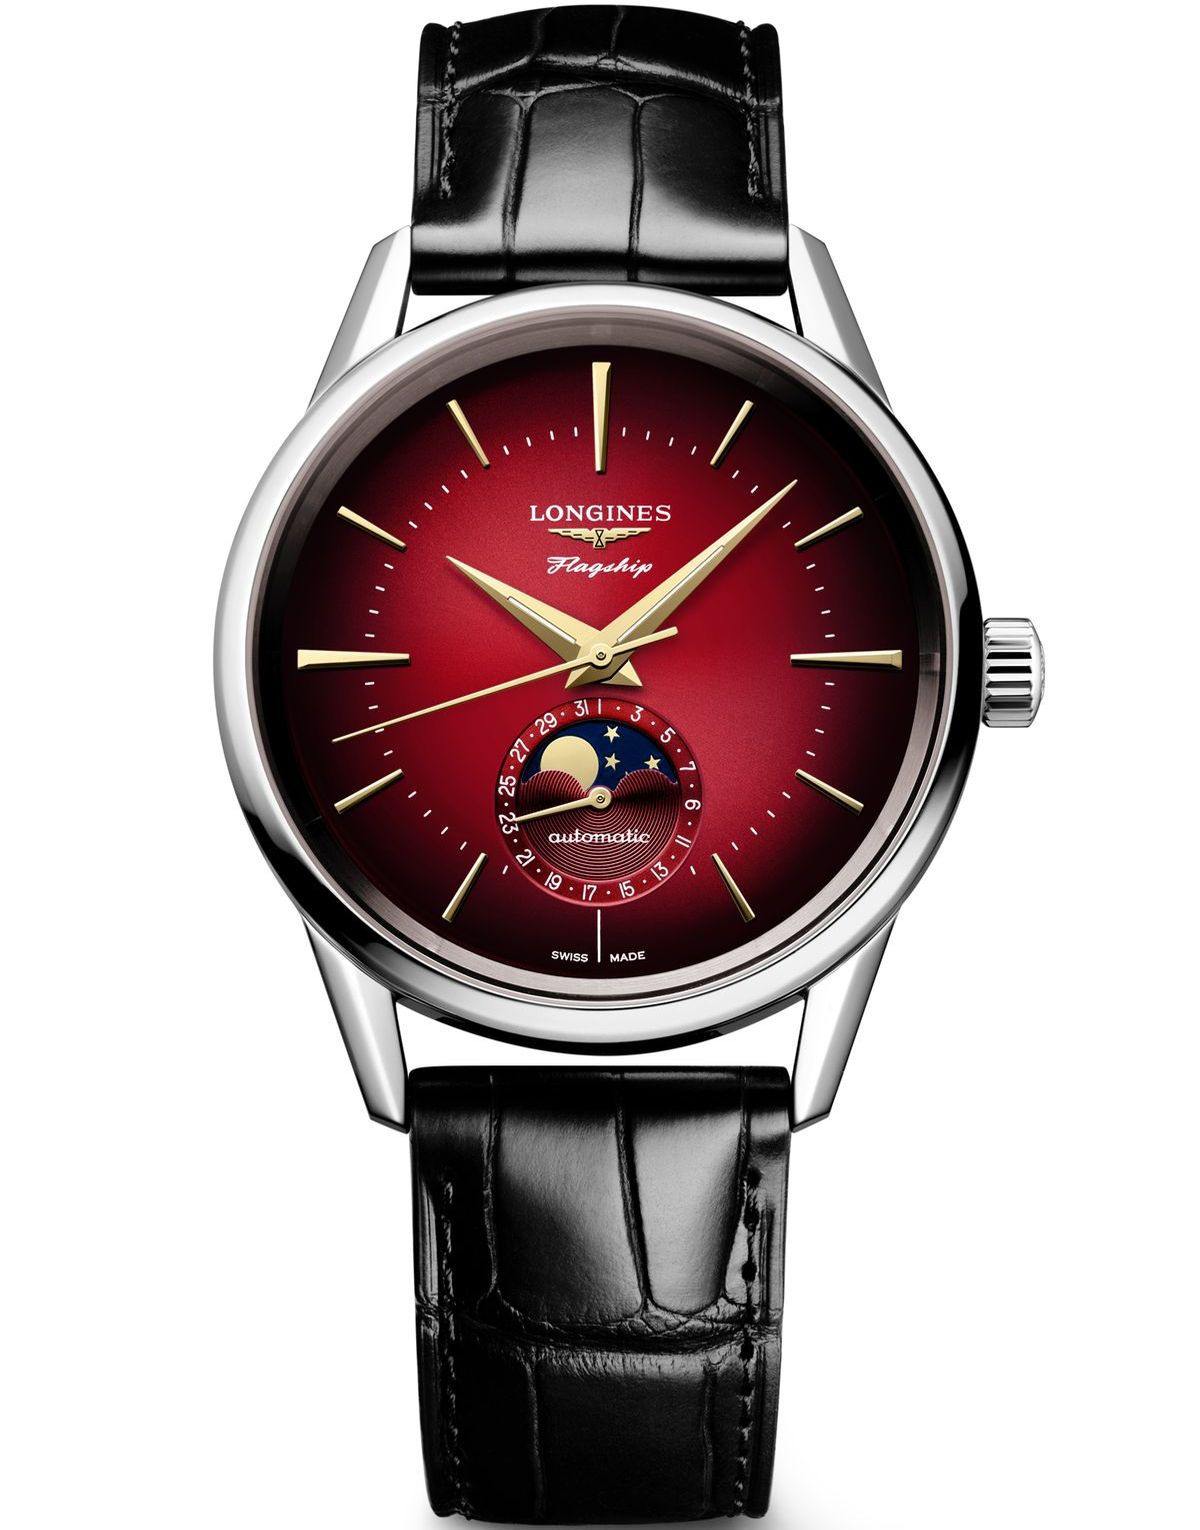 Foto: Longines Flagship Heritage Year of the Dragon.